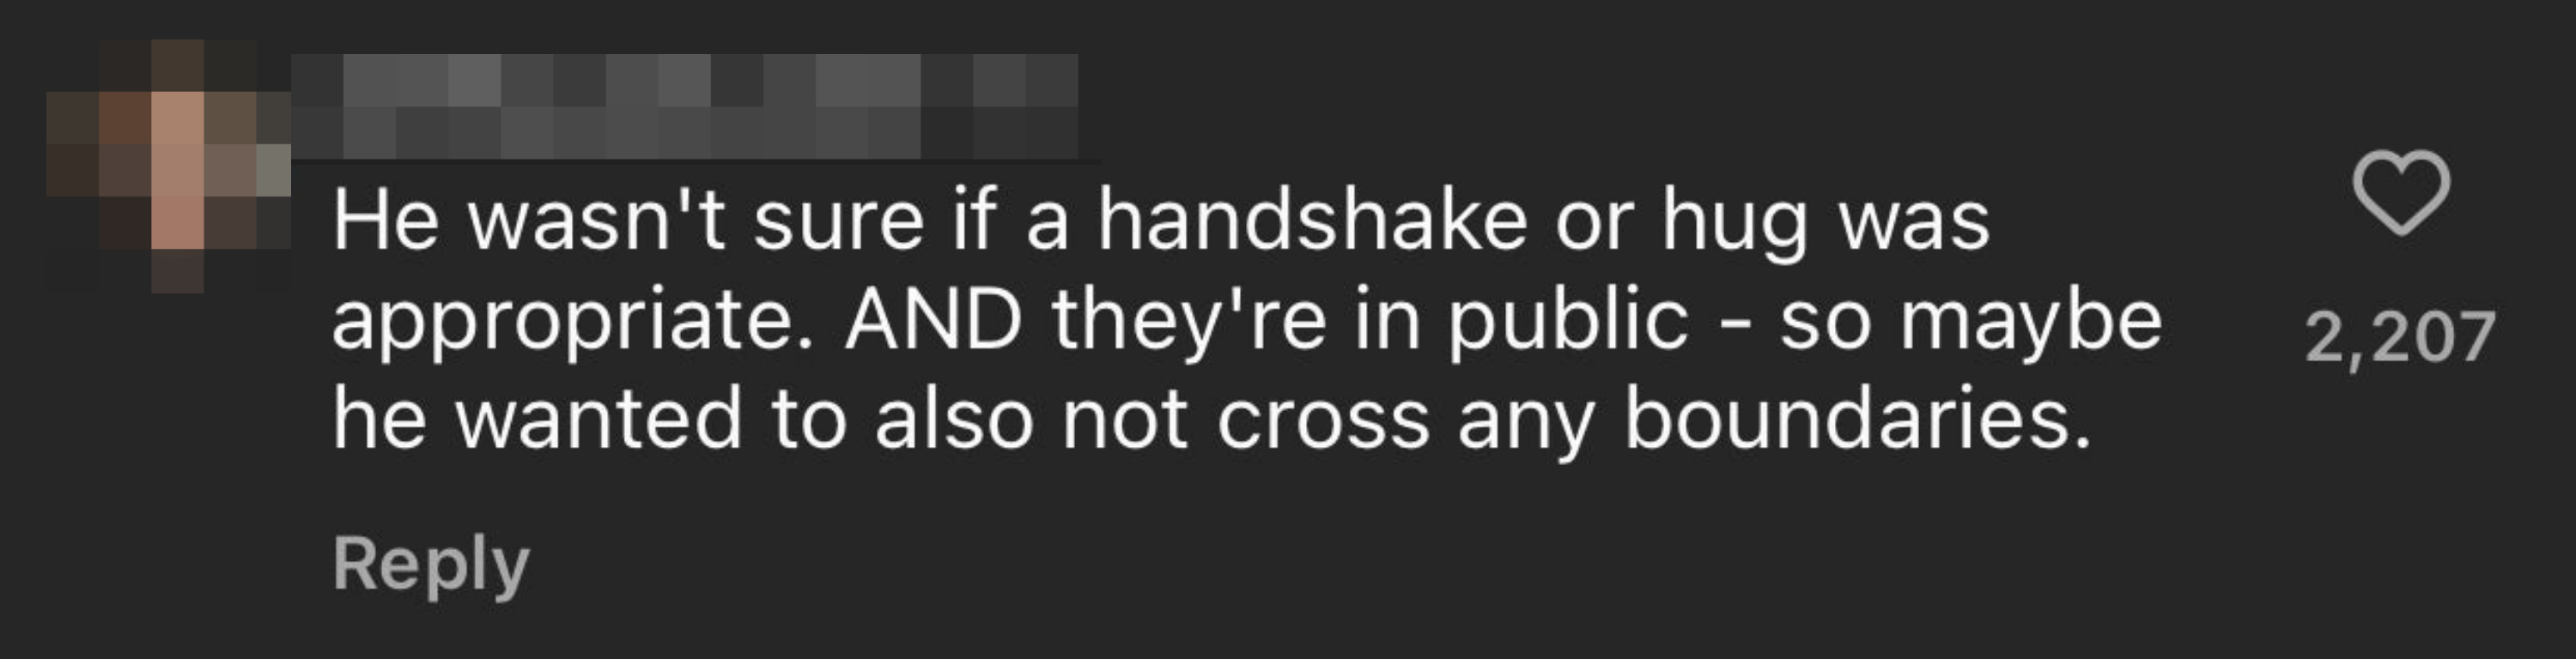 Comment on social media: &quot;He wasn&#x27;t sure if a handshake or hug was appropriate; AND they&#x27;re in public - so maybe he wanted to also not cross any boundaries&quot;